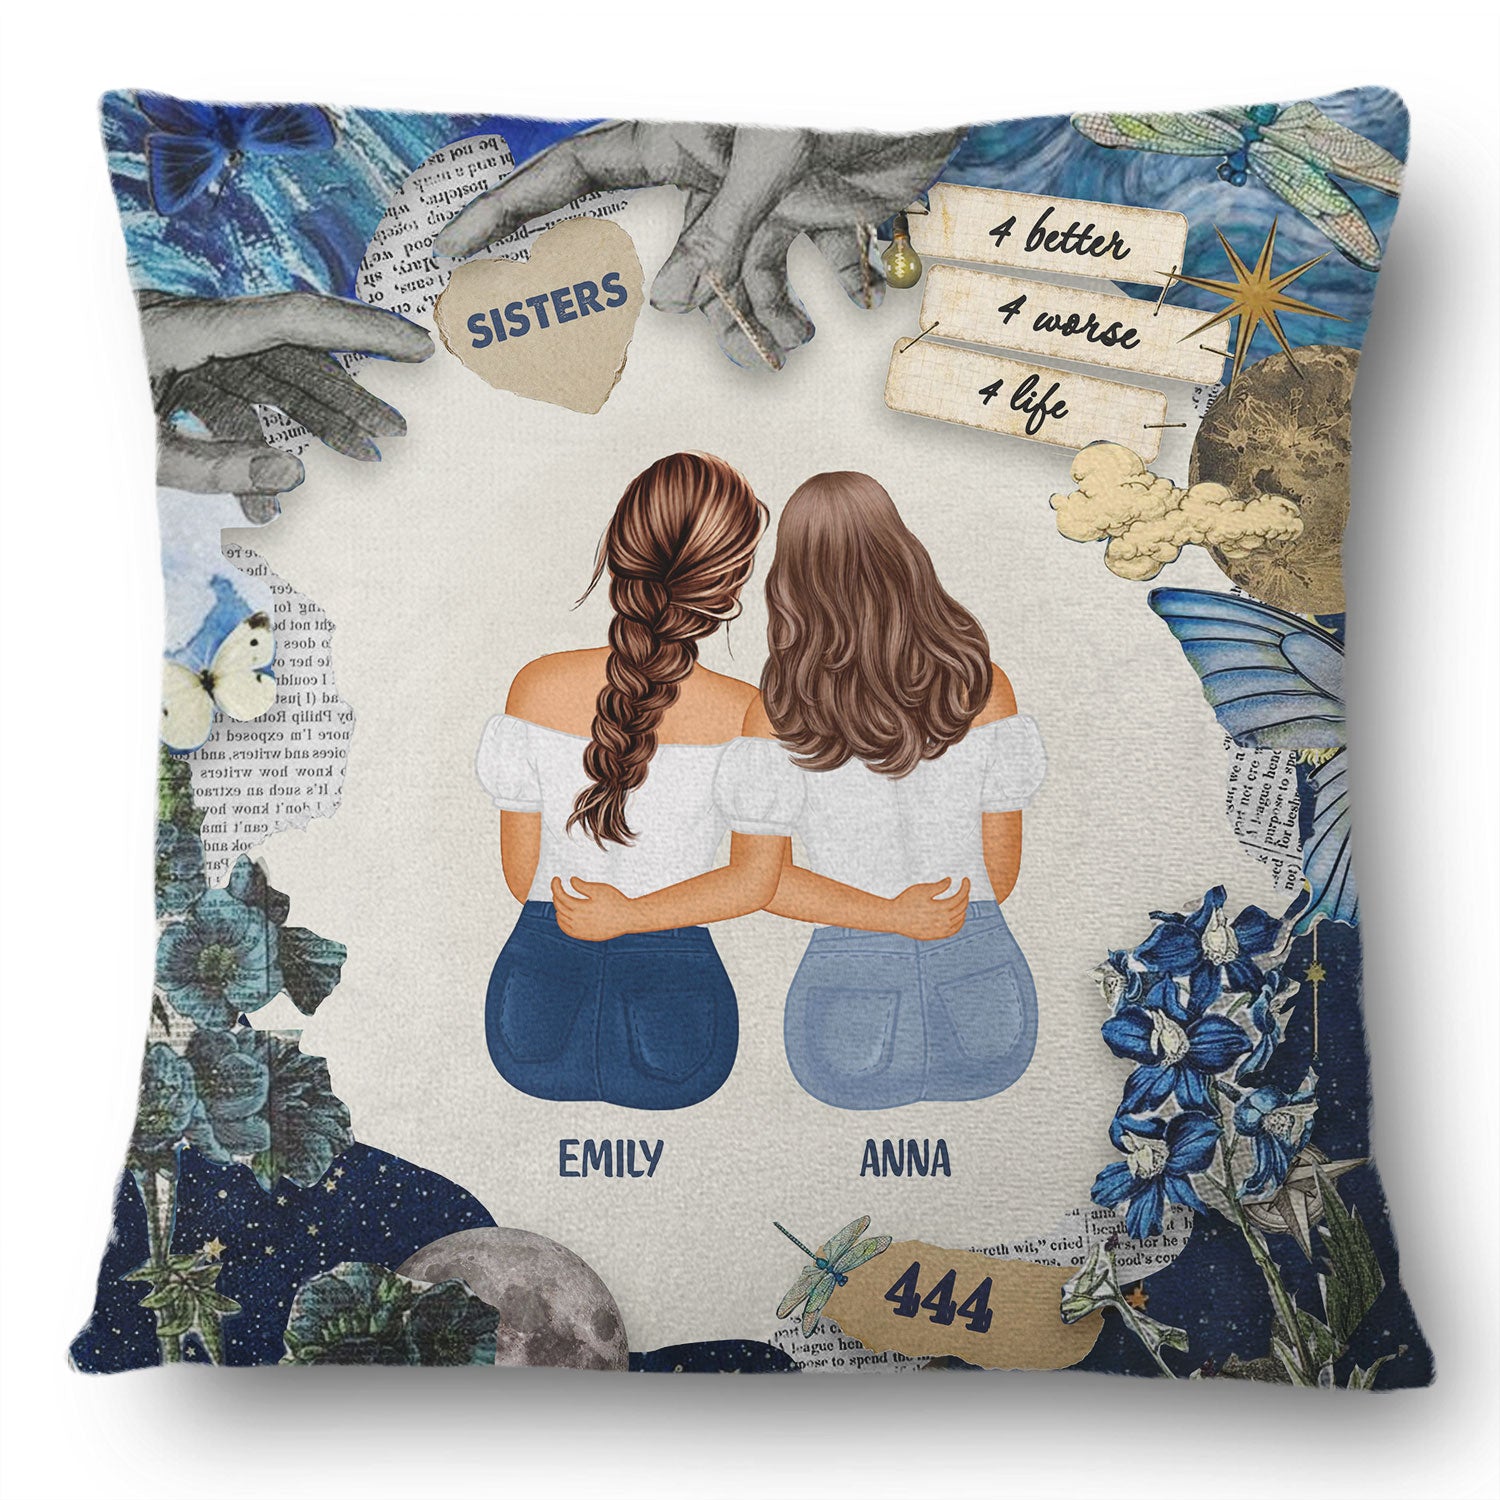 4 Better 4 Worse 4 Life - Gift For Sisters And Besties - Personalized Pillow